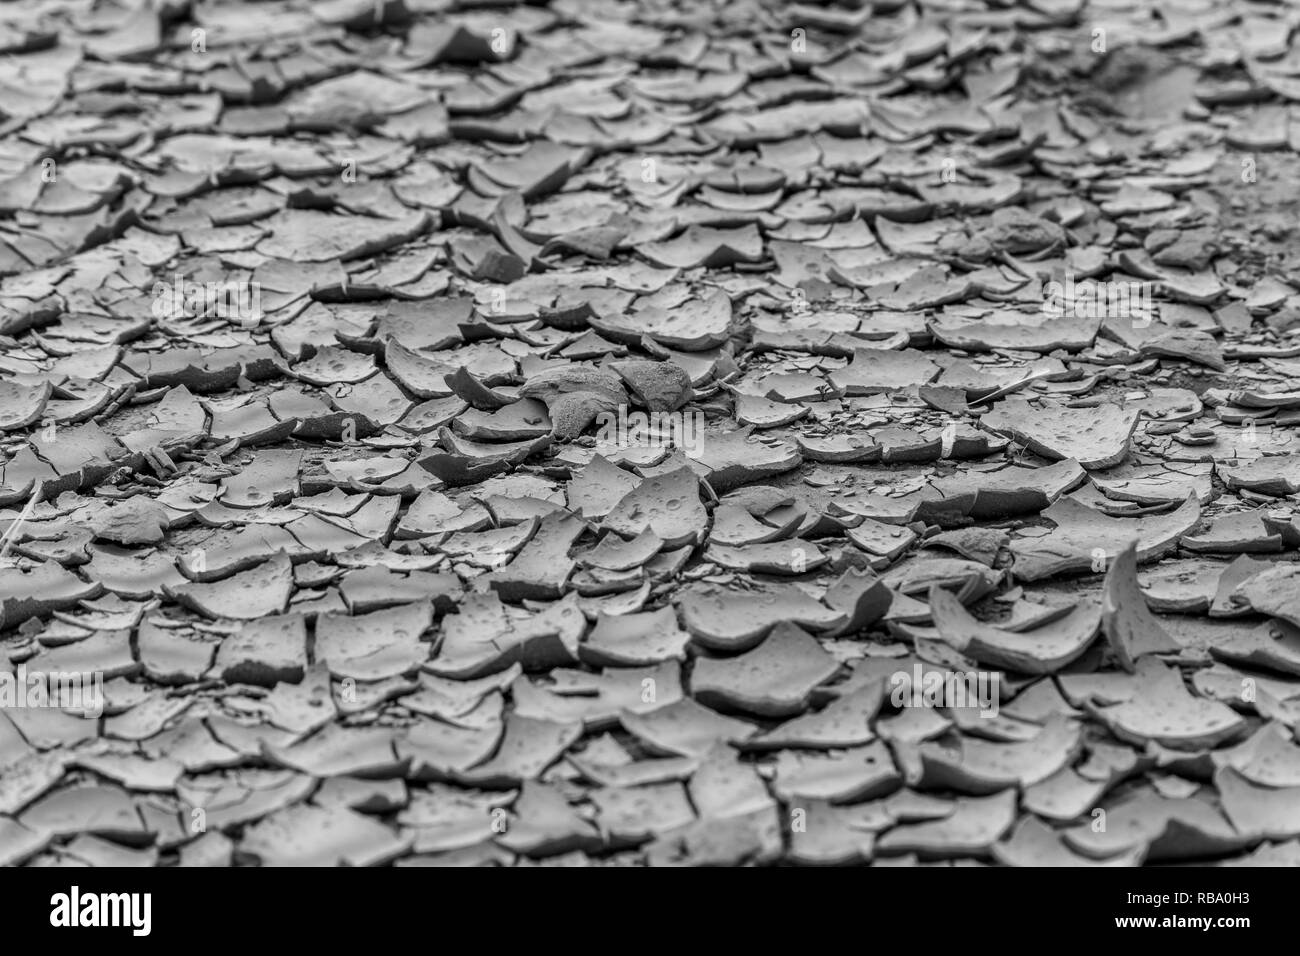 Black and white clay cracked up in the desert. Stock Photo